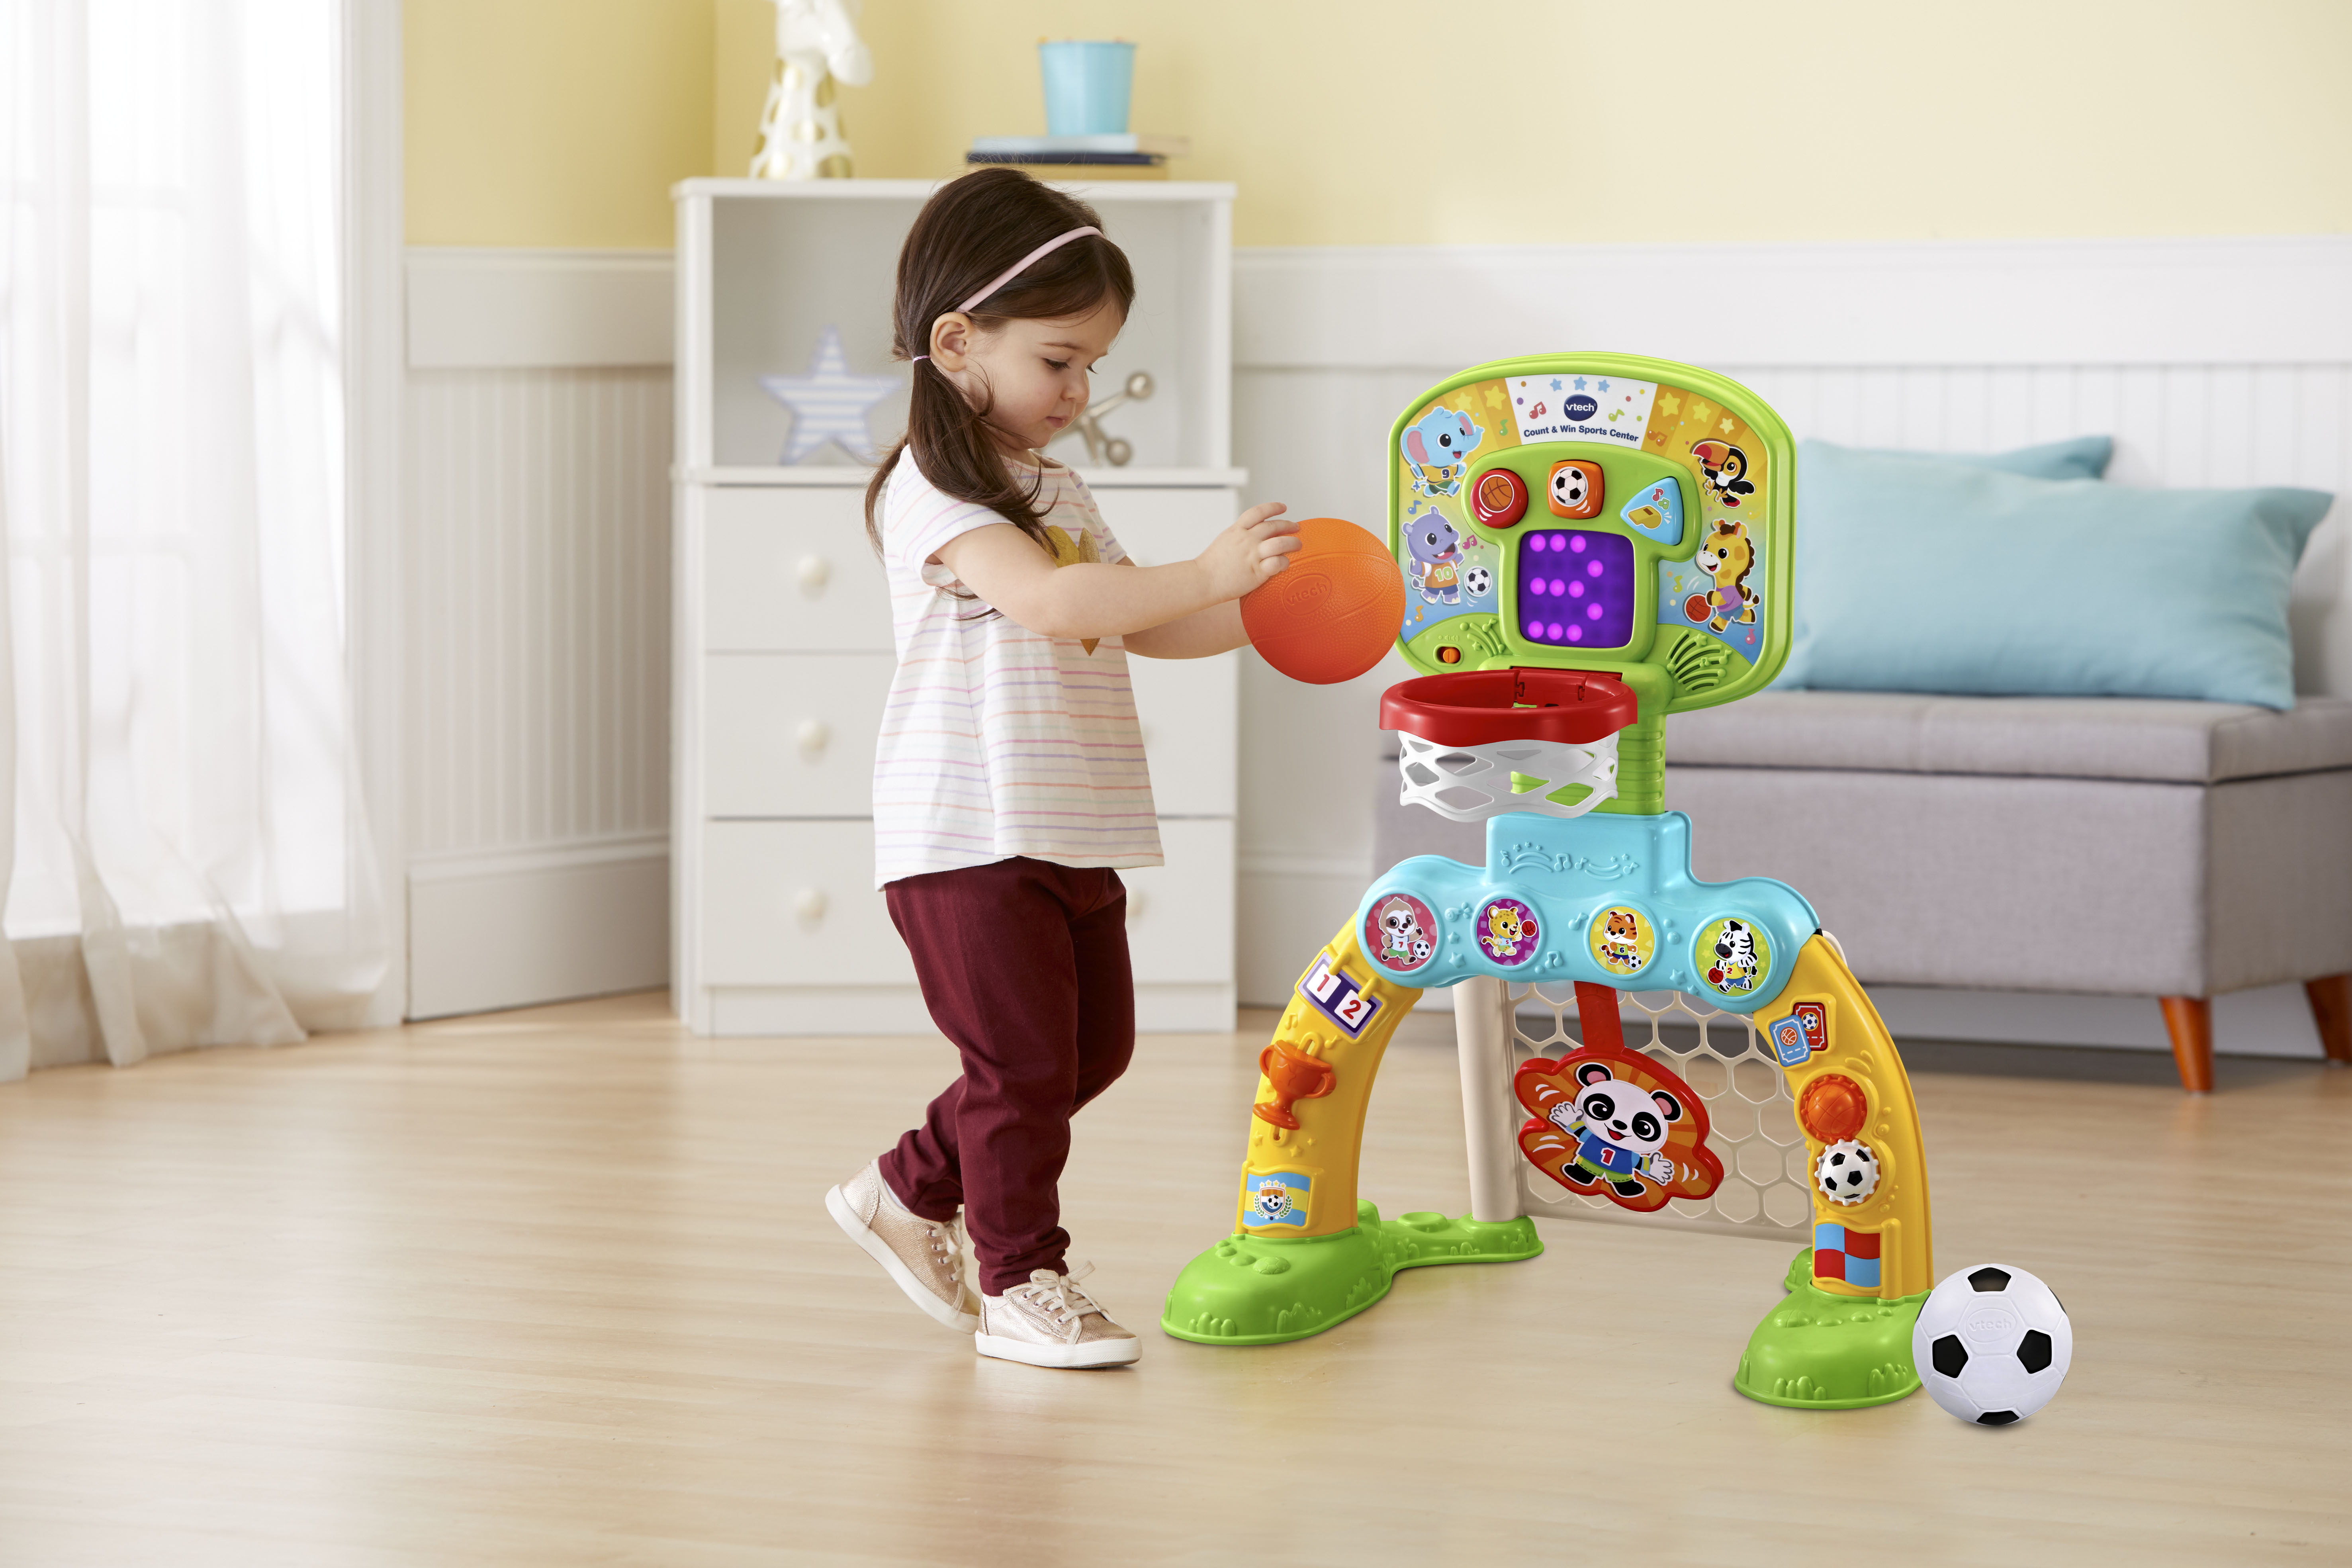 VTech Count & Win Sports Center, Basketball and Soccer Toy for Toddlers, Teaches Physical Activity - image 5 of 13